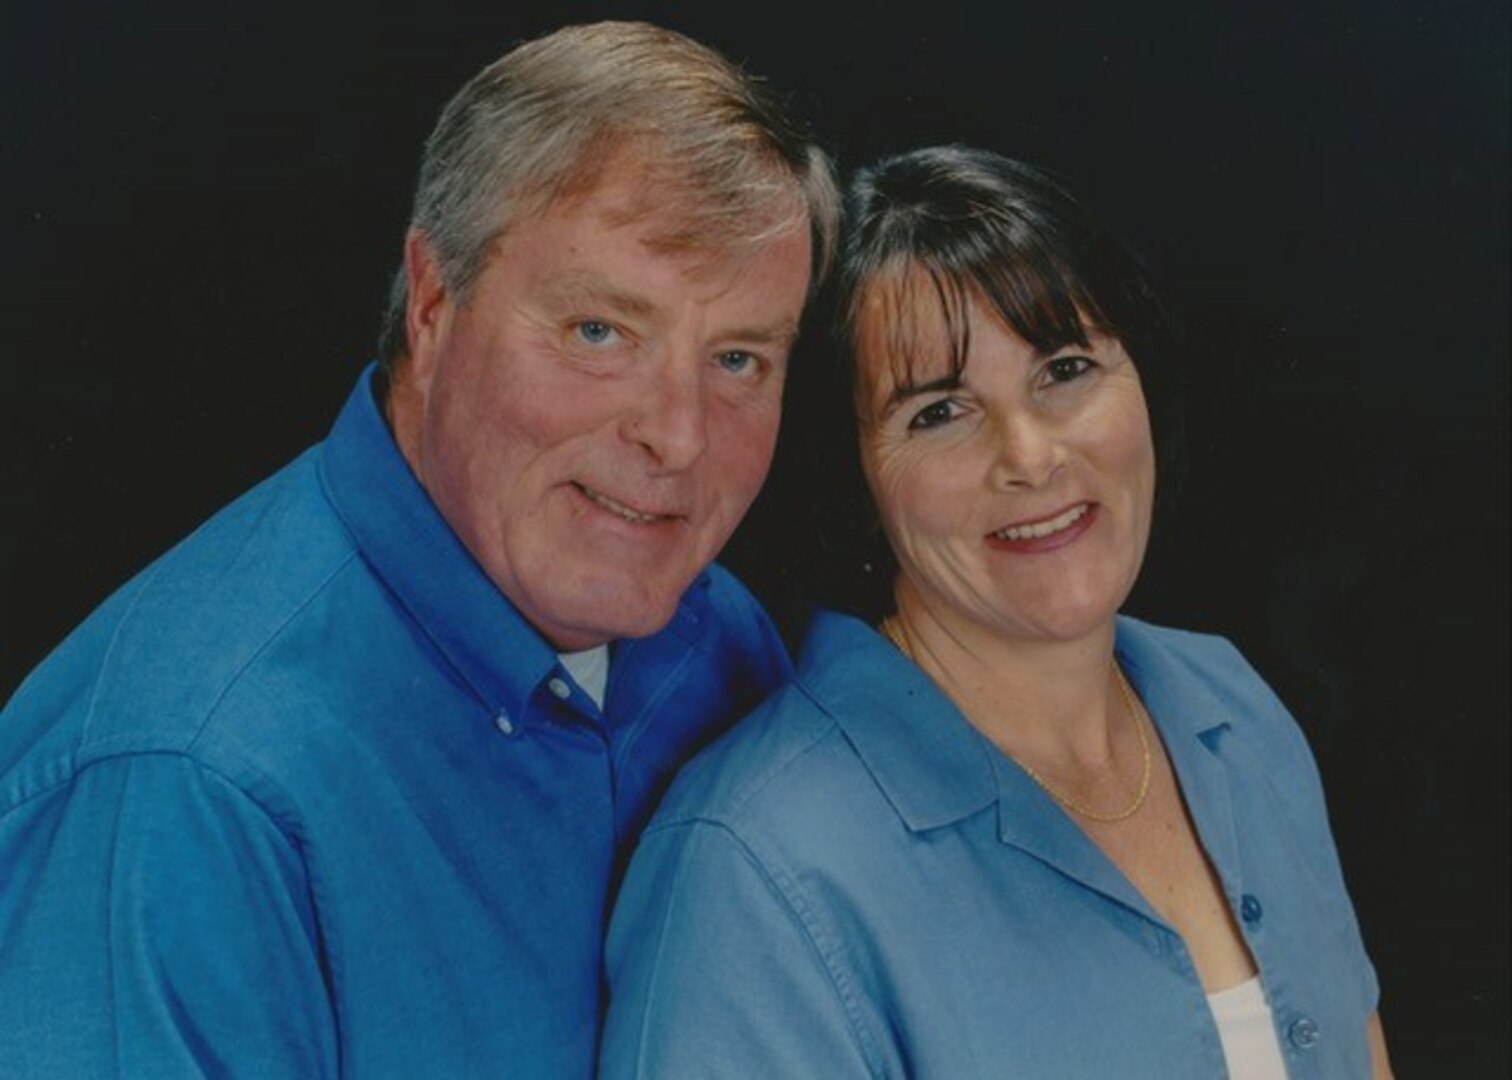 Paul Rogers and his wife.